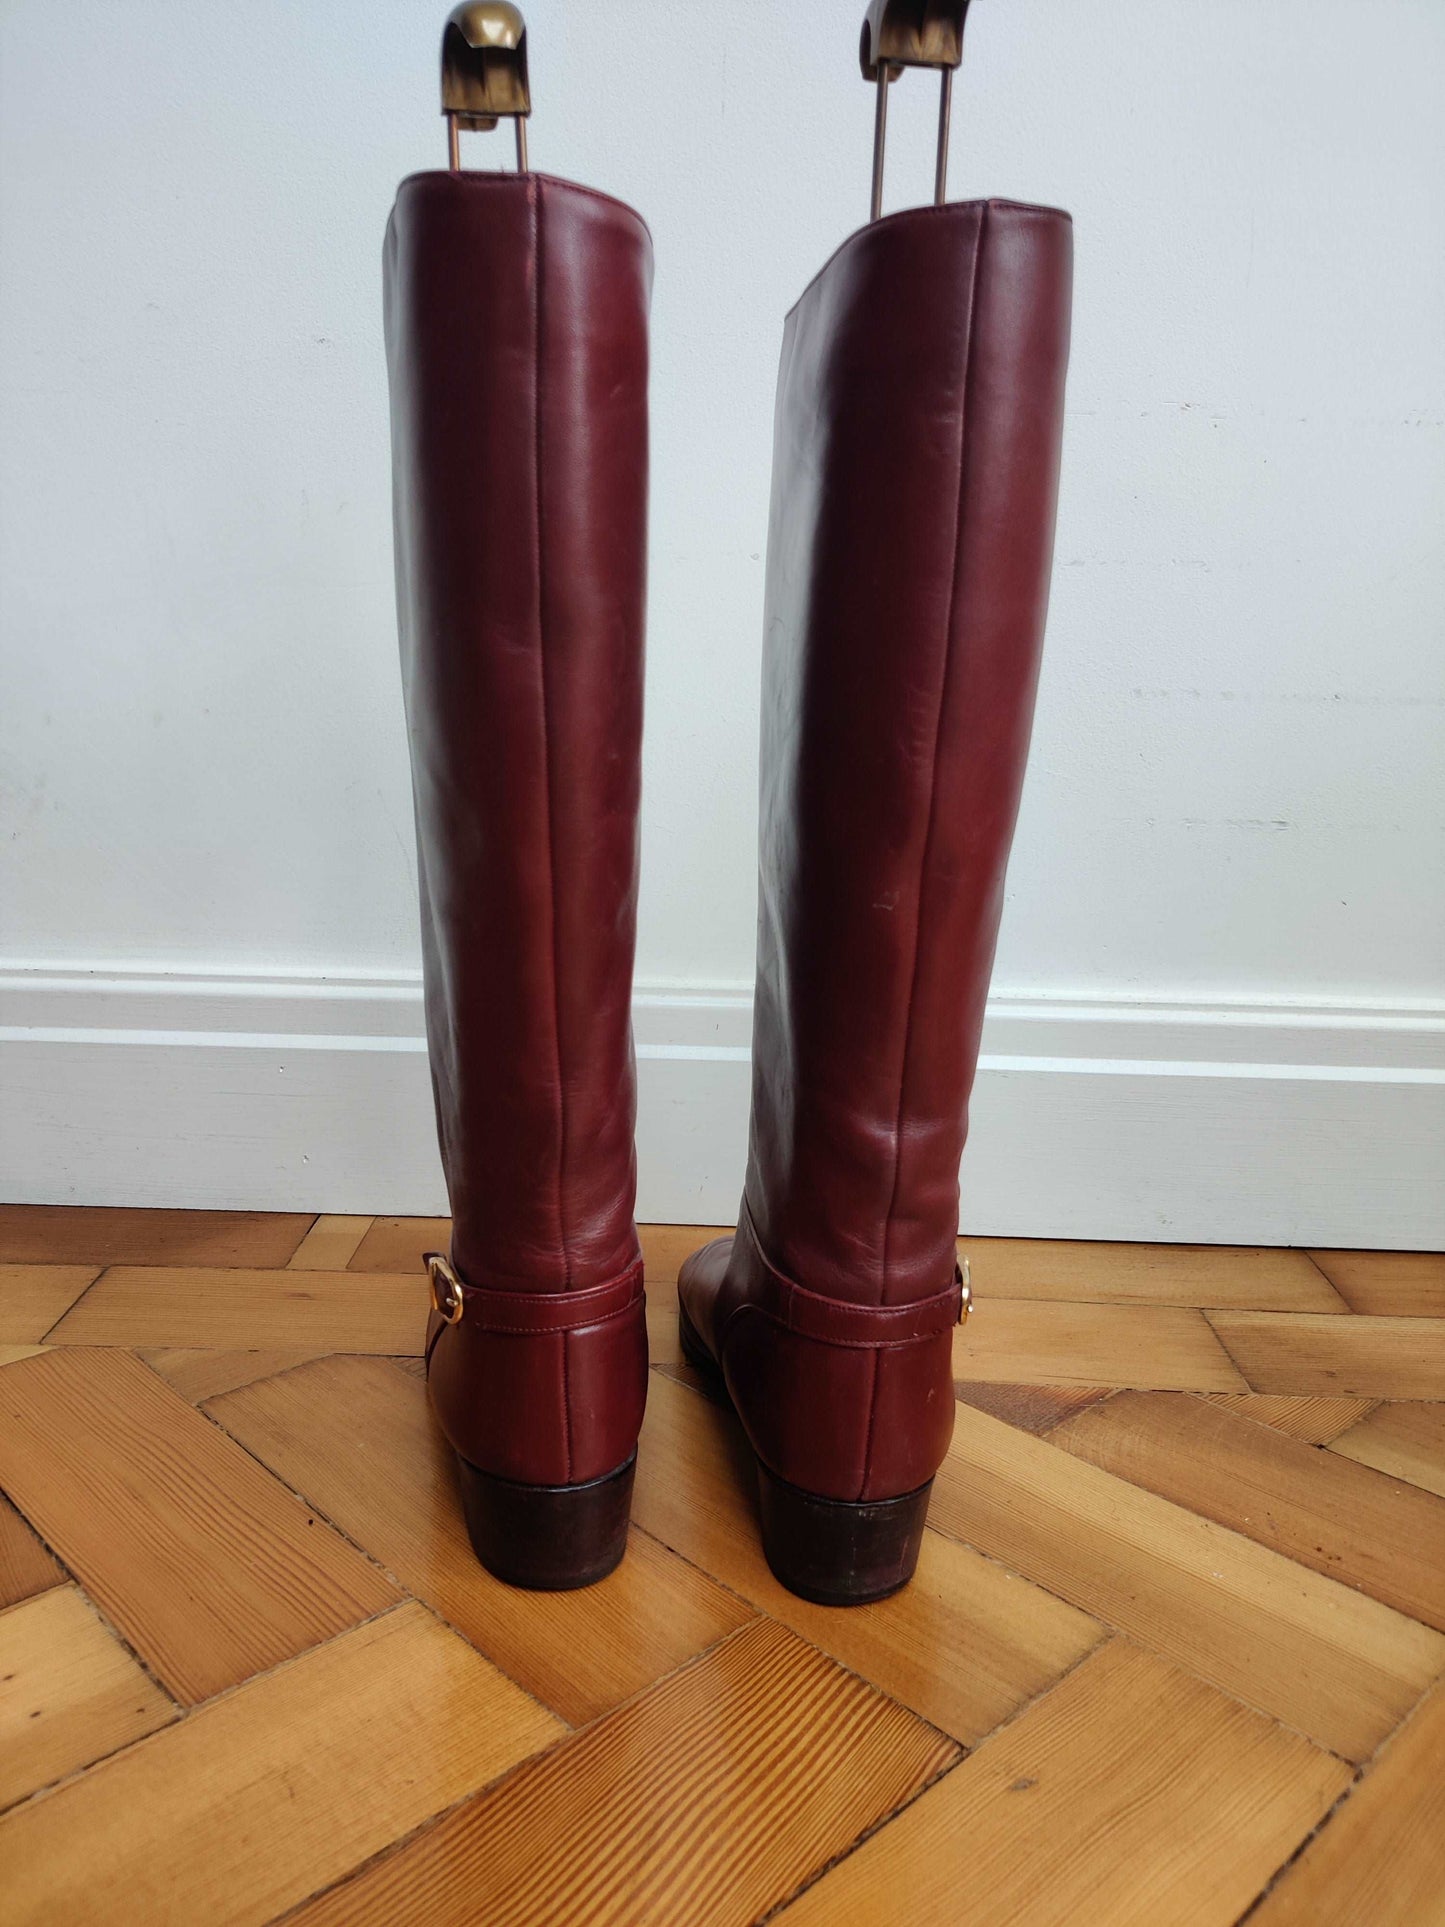 vintage leather boots, riding boot style.